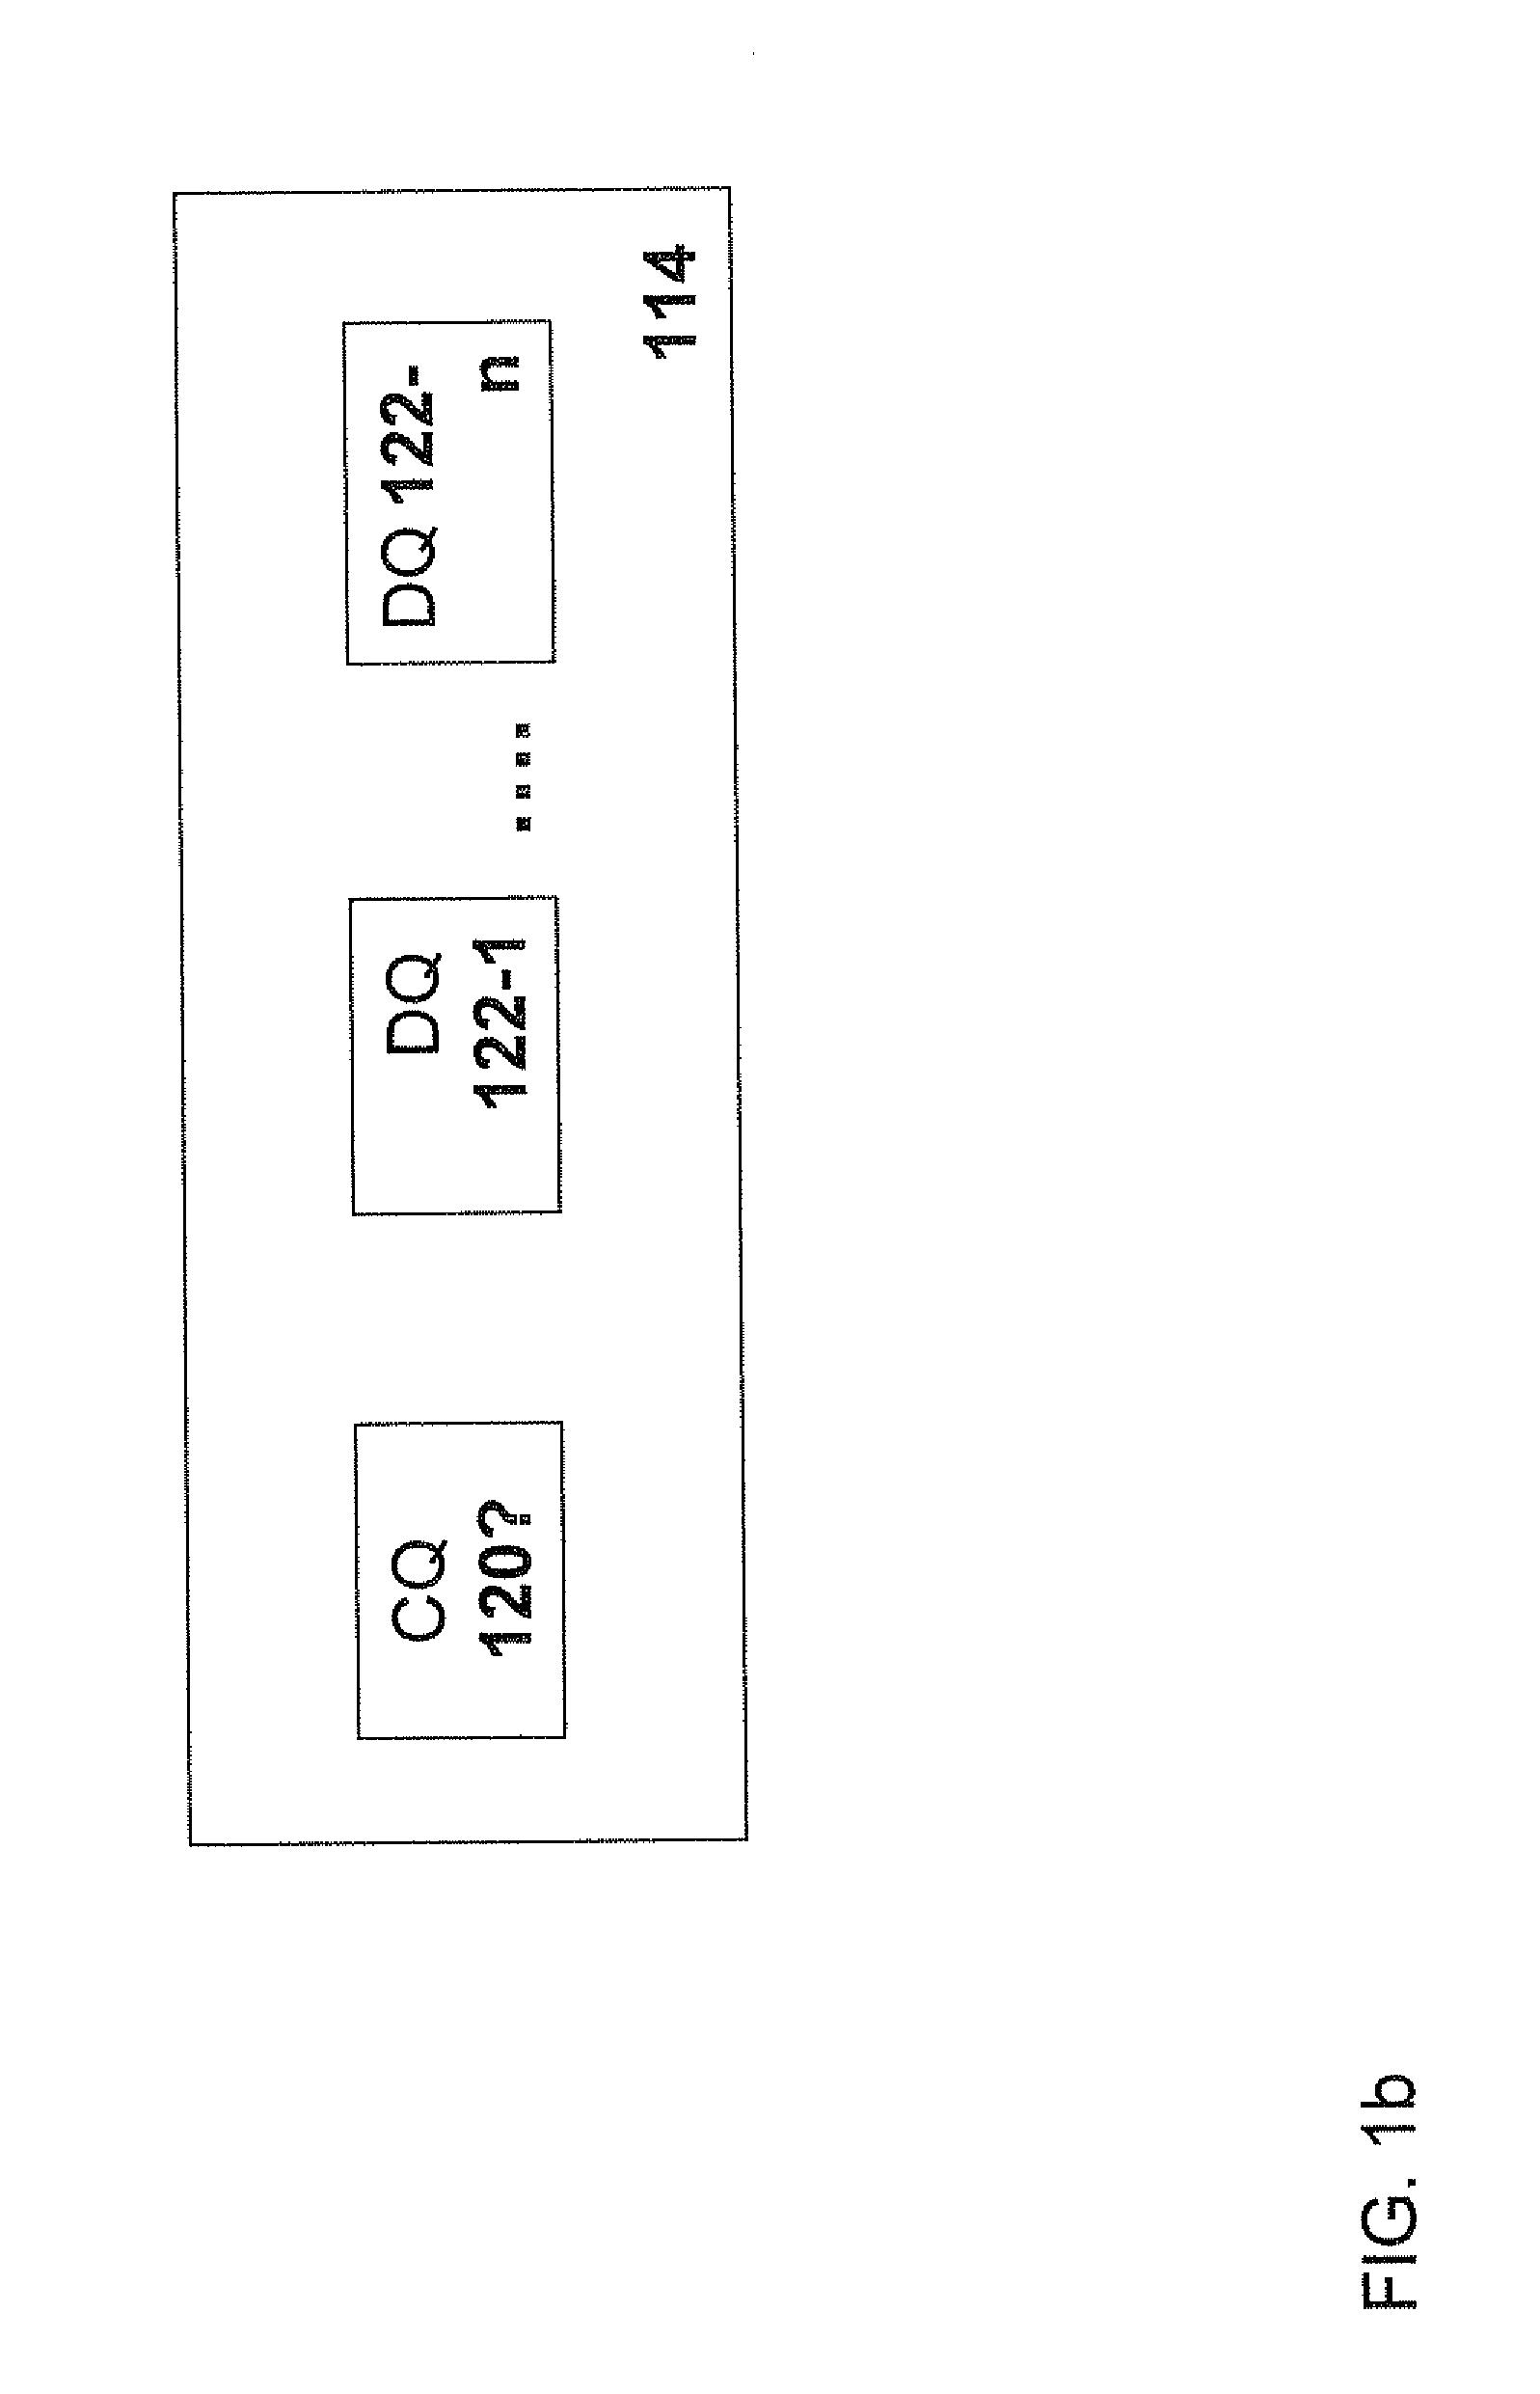 System and method for accelerating input/output access operation on a virtual machine